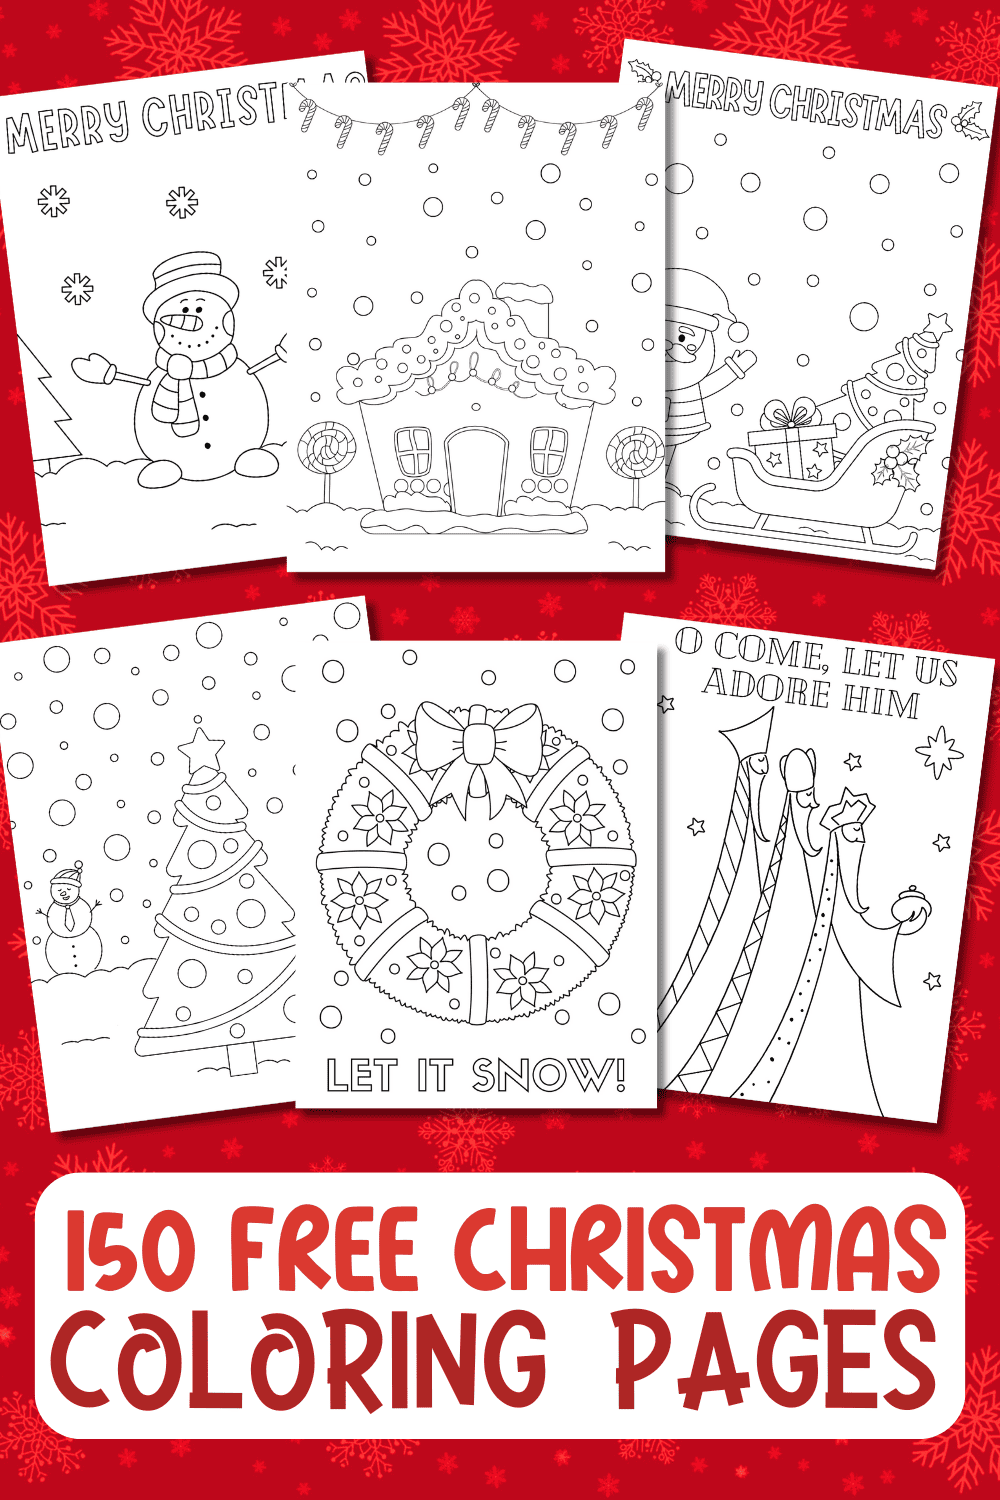 Christmas Coloring Books For Kids Bulk: The Coloring Pages, design for  kids, Children, Boys, Girls and Adults (Paperback)